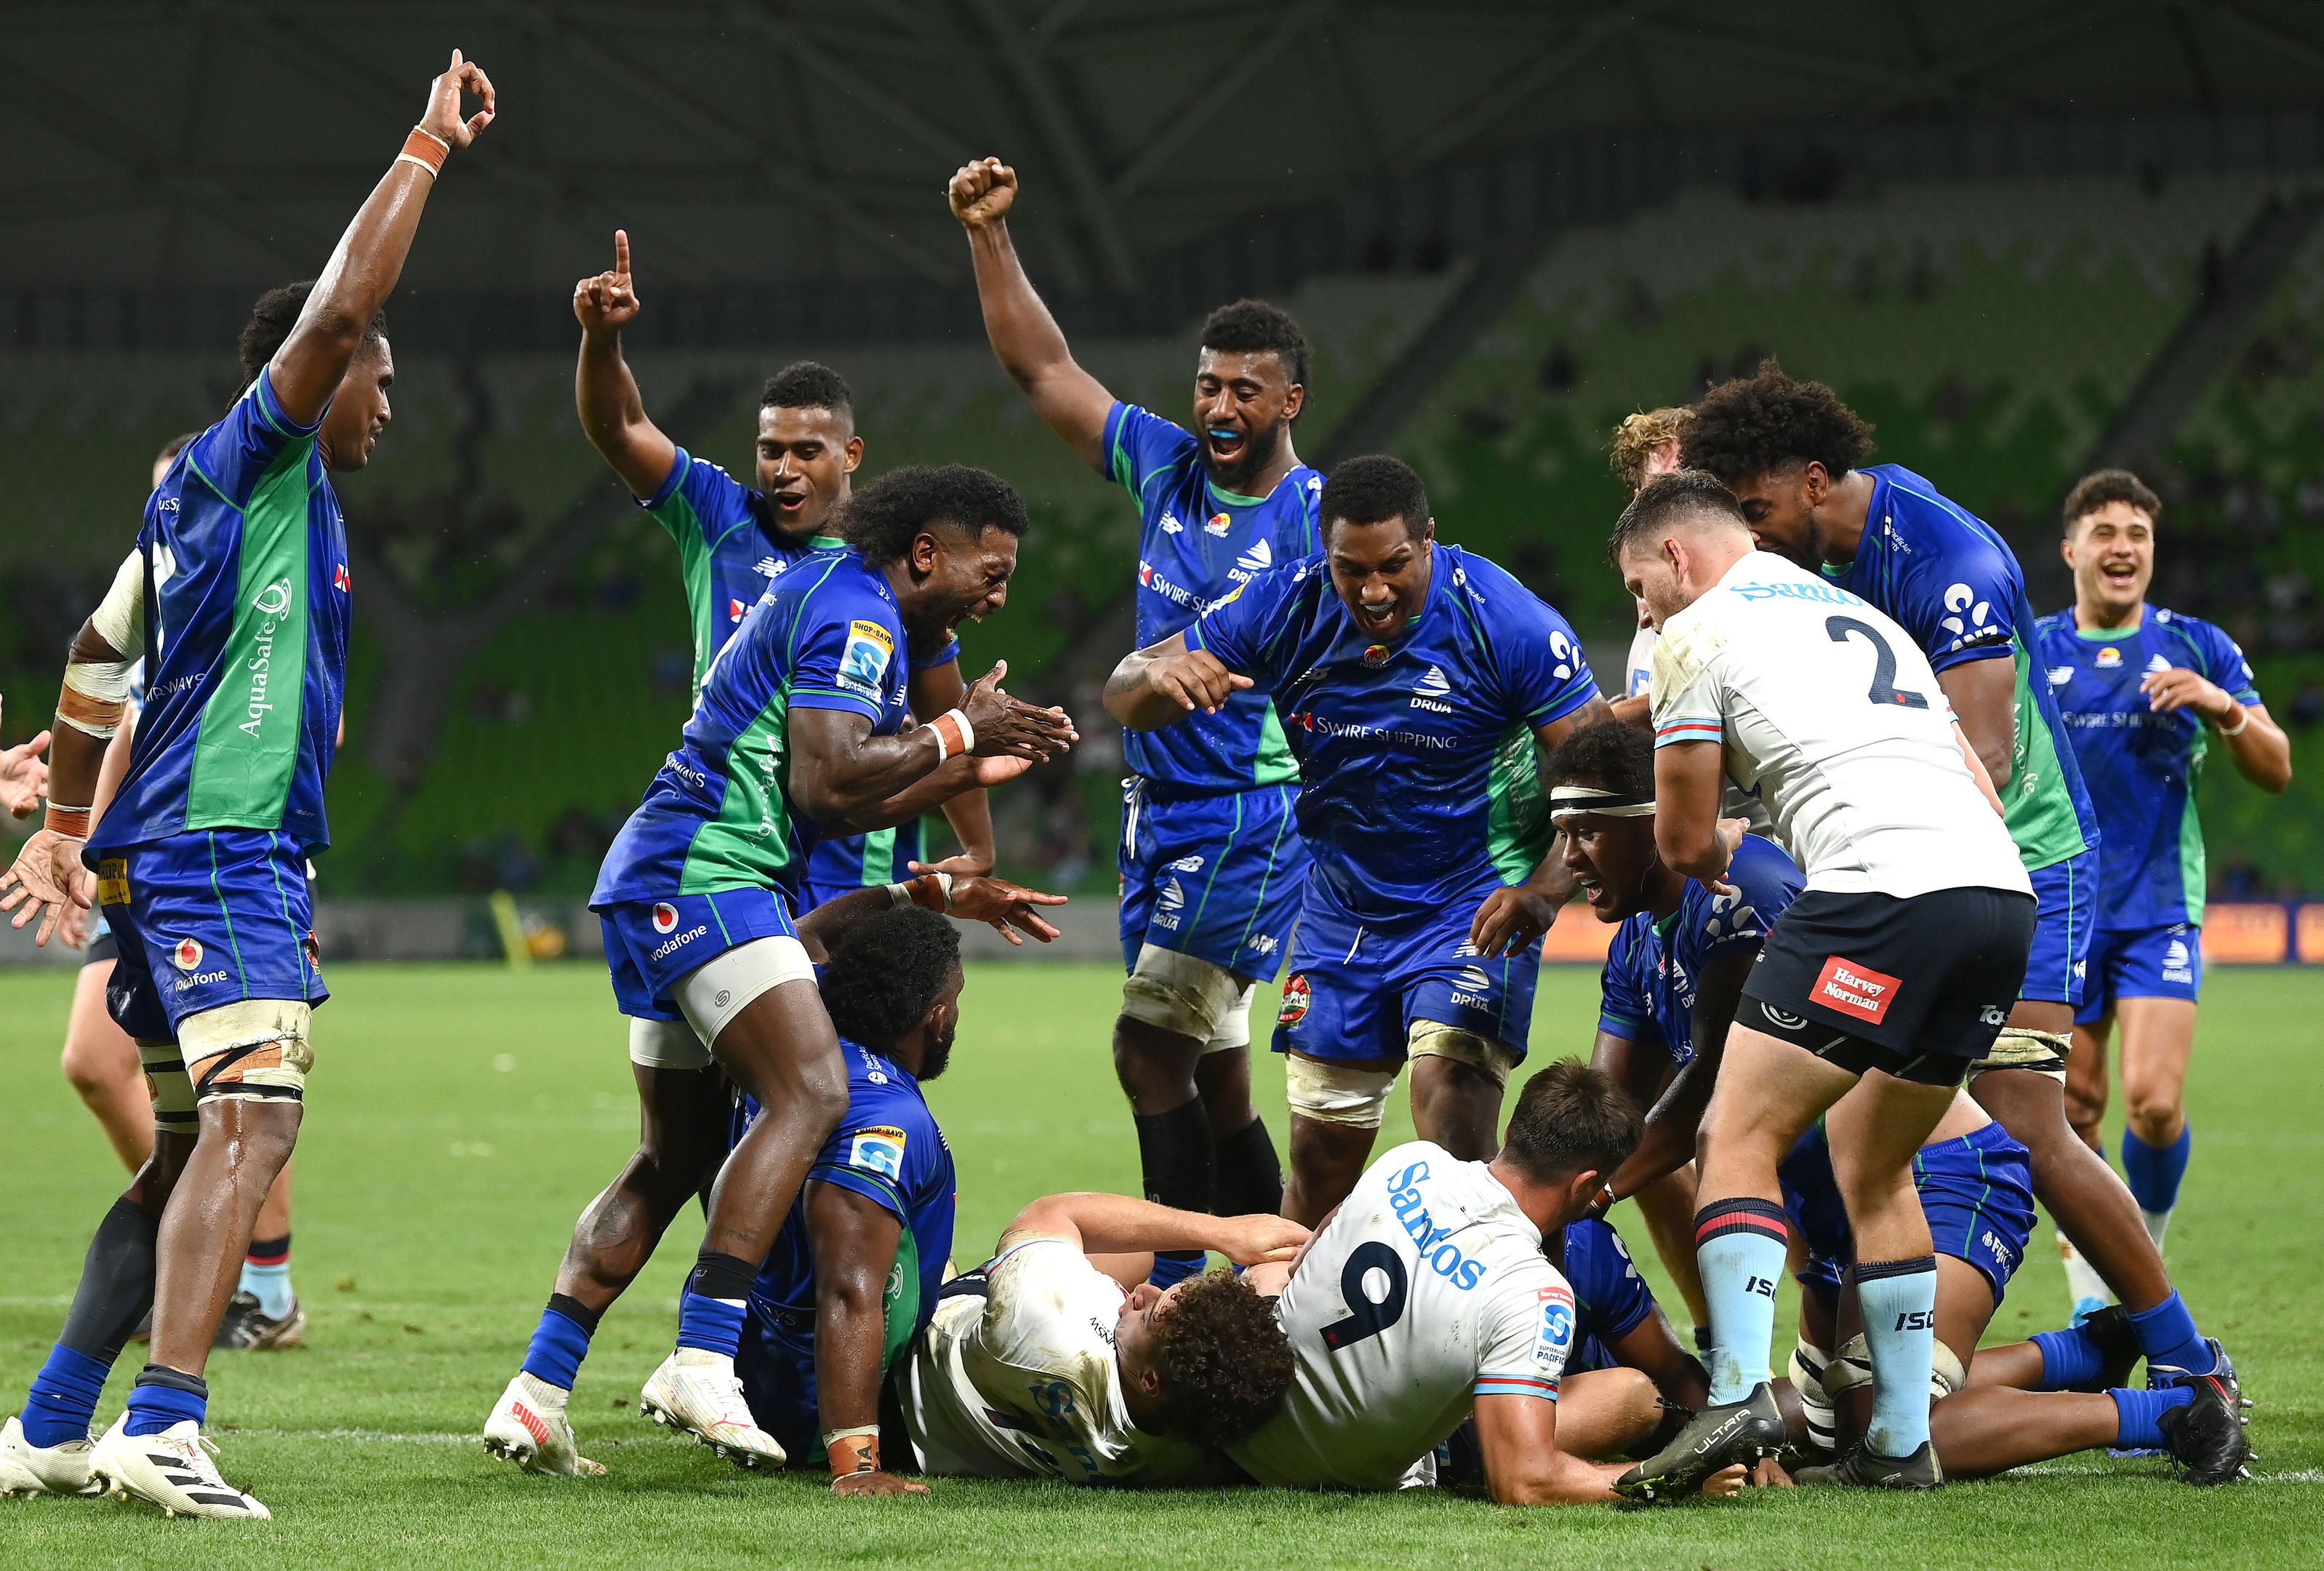 EXCLUSIVE: Bold prediction for Super Rugby's 'almost unbeatable' at home new team Fijian Drua